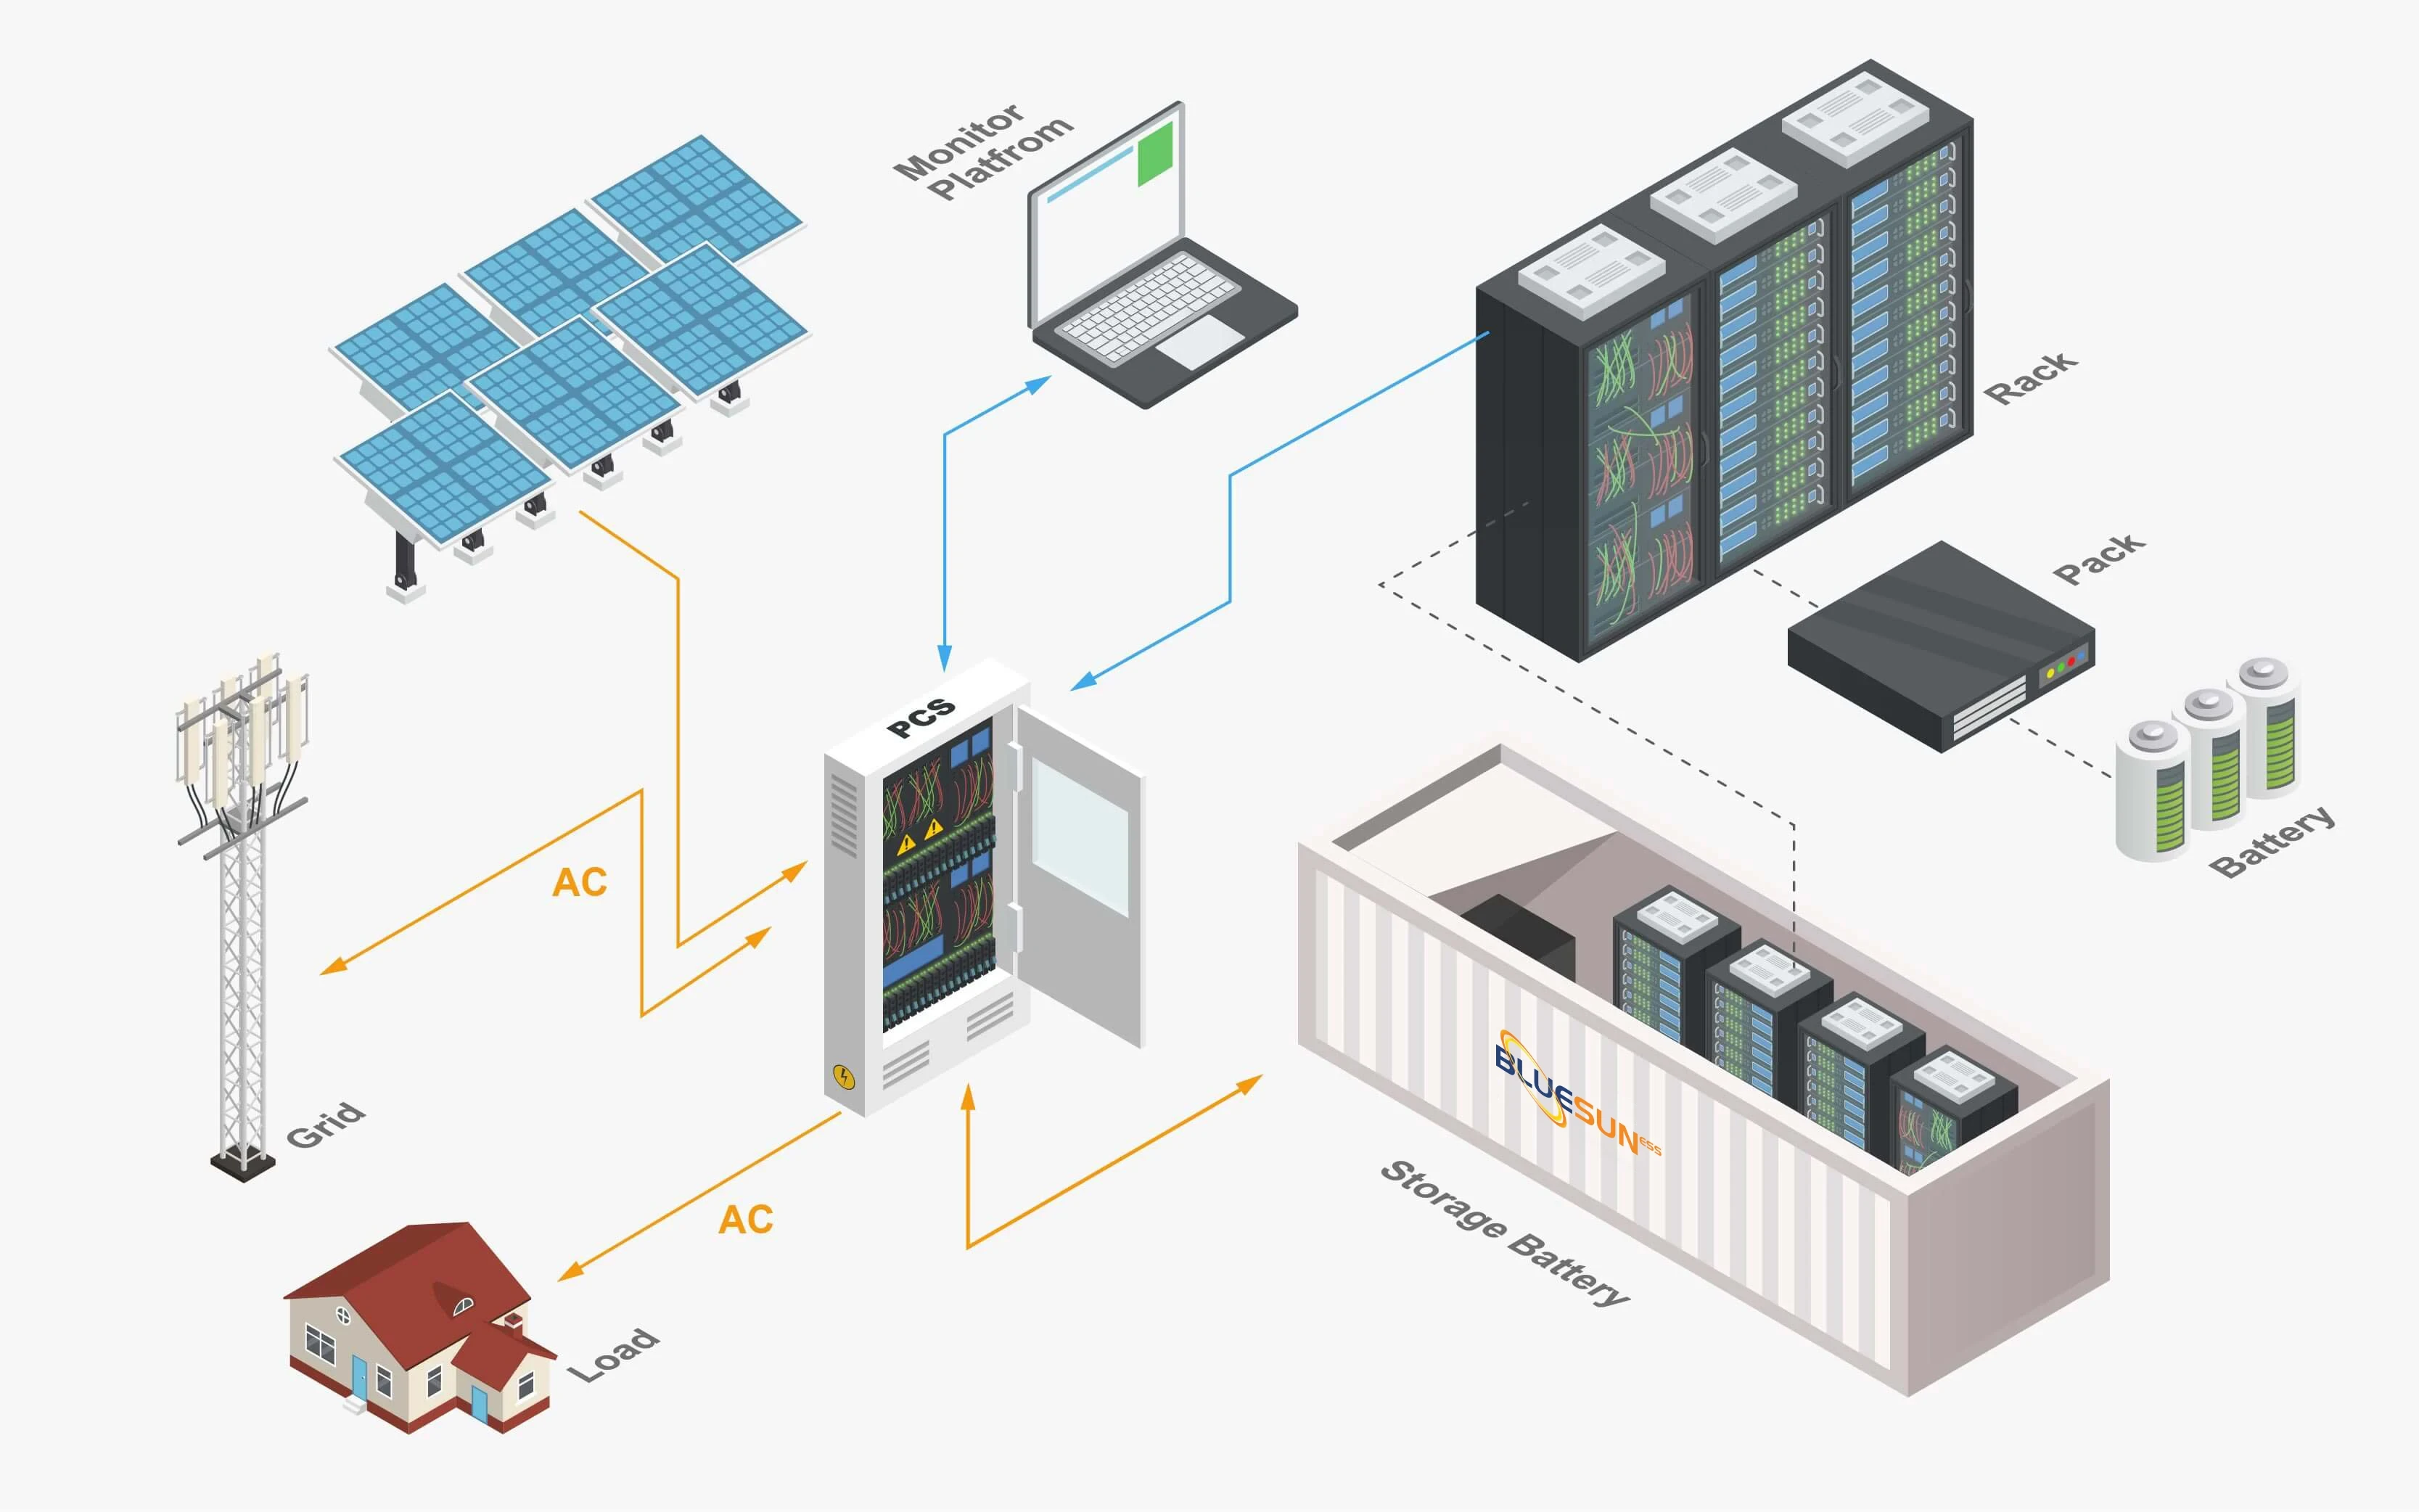 500kw solar system,ESS solar energy systems,Container energy storage